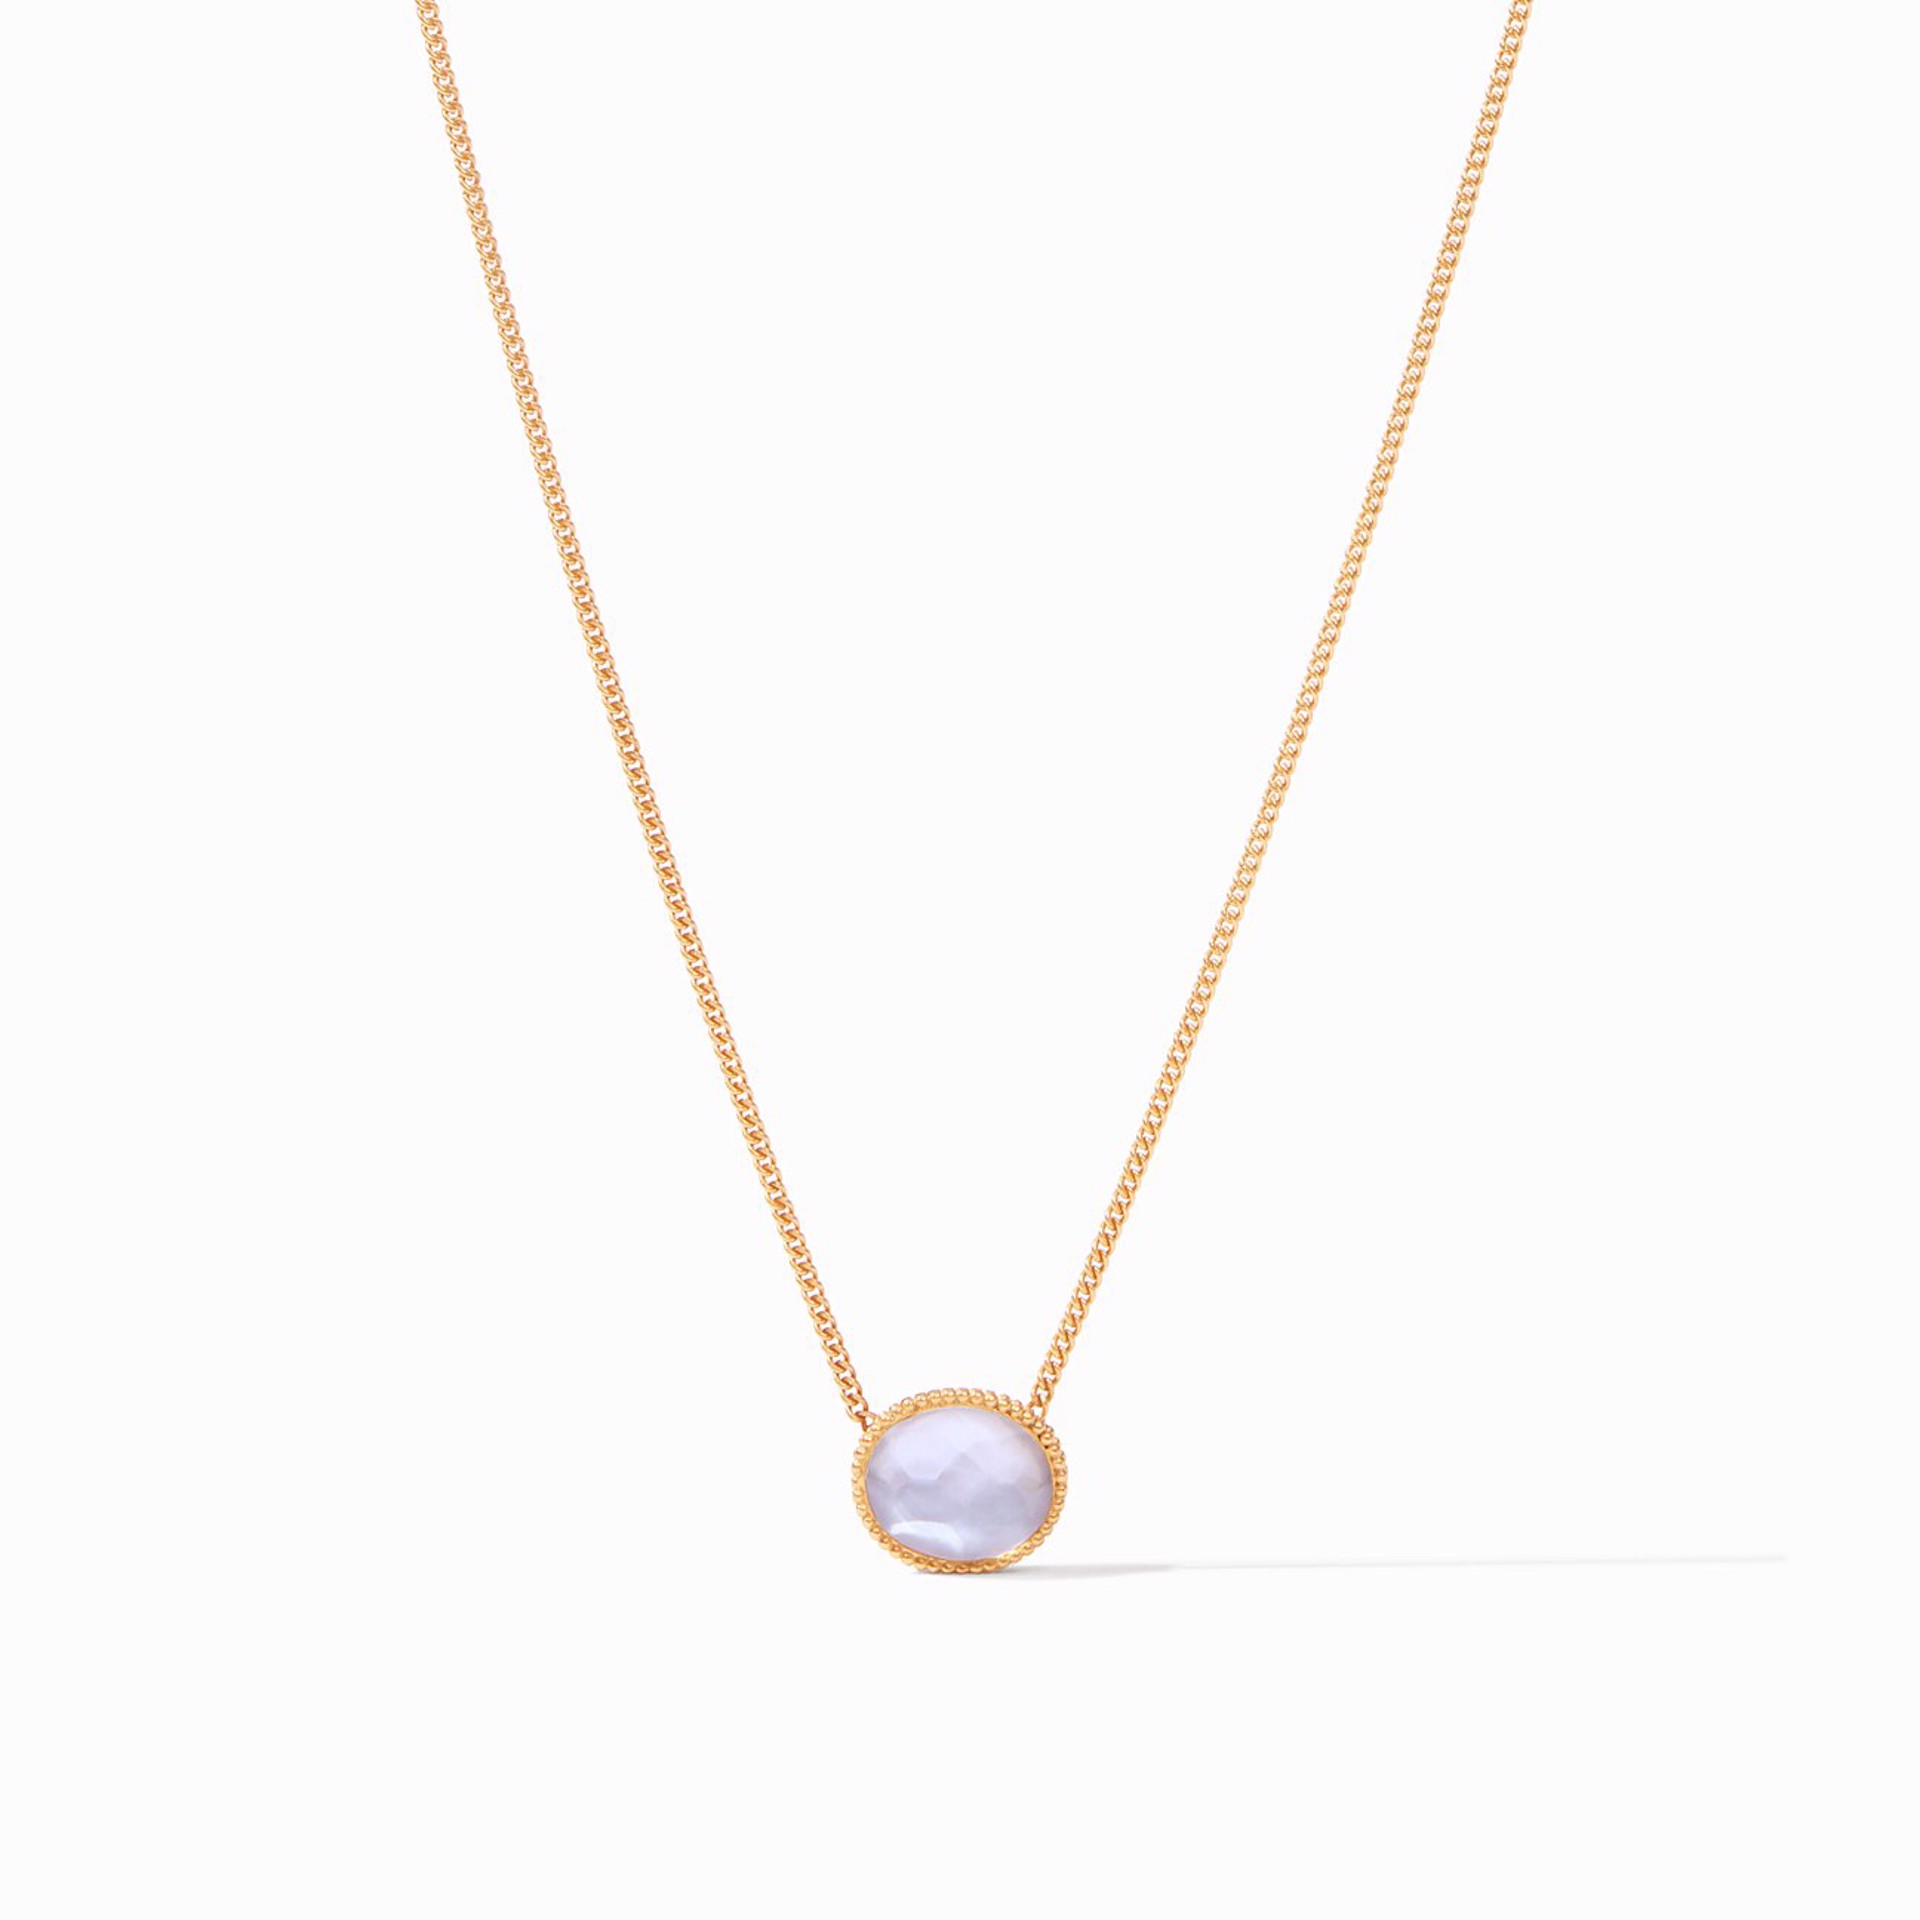 Verona Solitaire Necklace - Iridescent Chalcedony Blue by Julie Vos